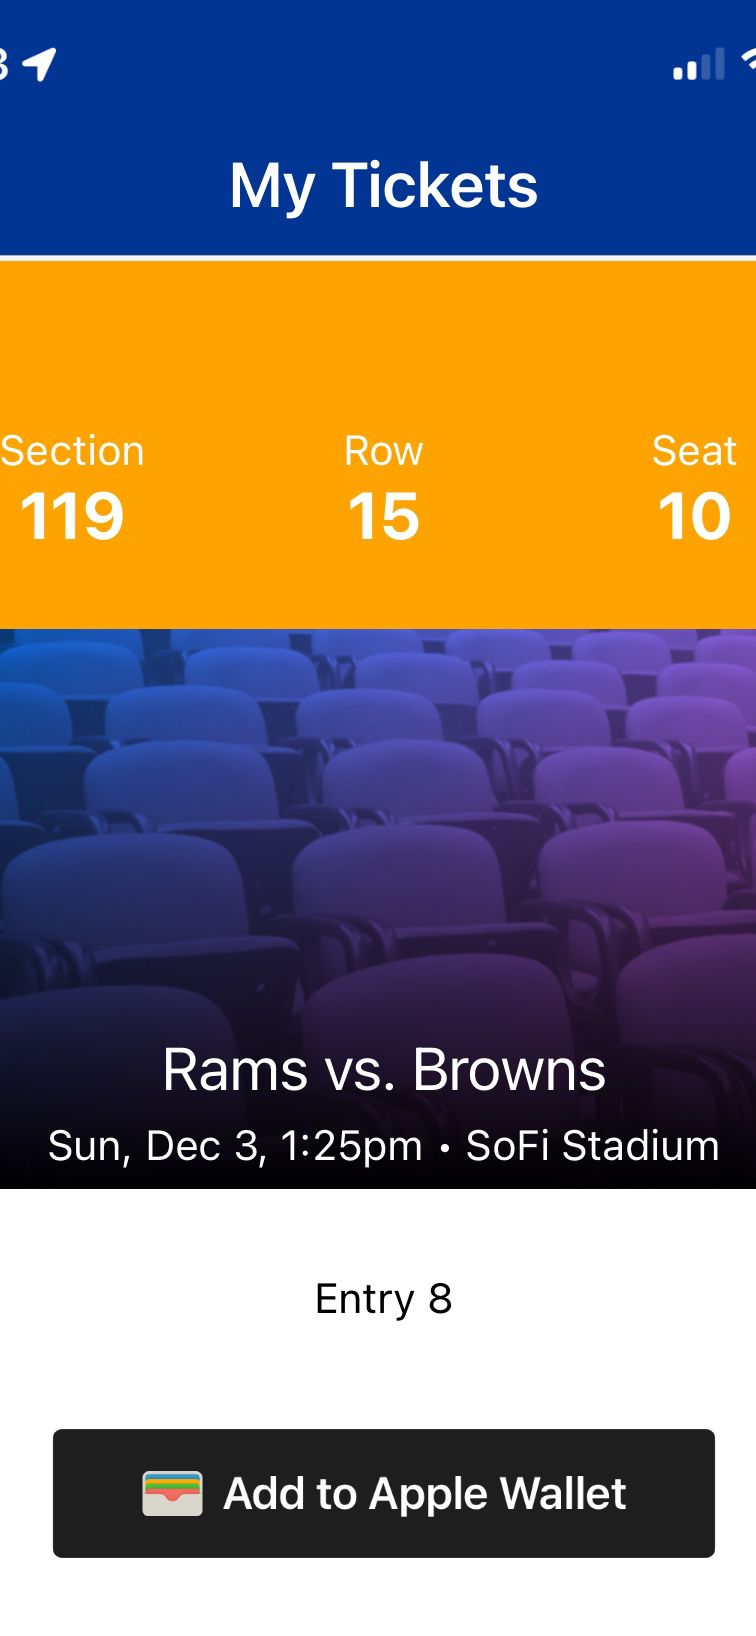 Rams vs Browns Section 119  2 Tickets  $150 Each Ticket